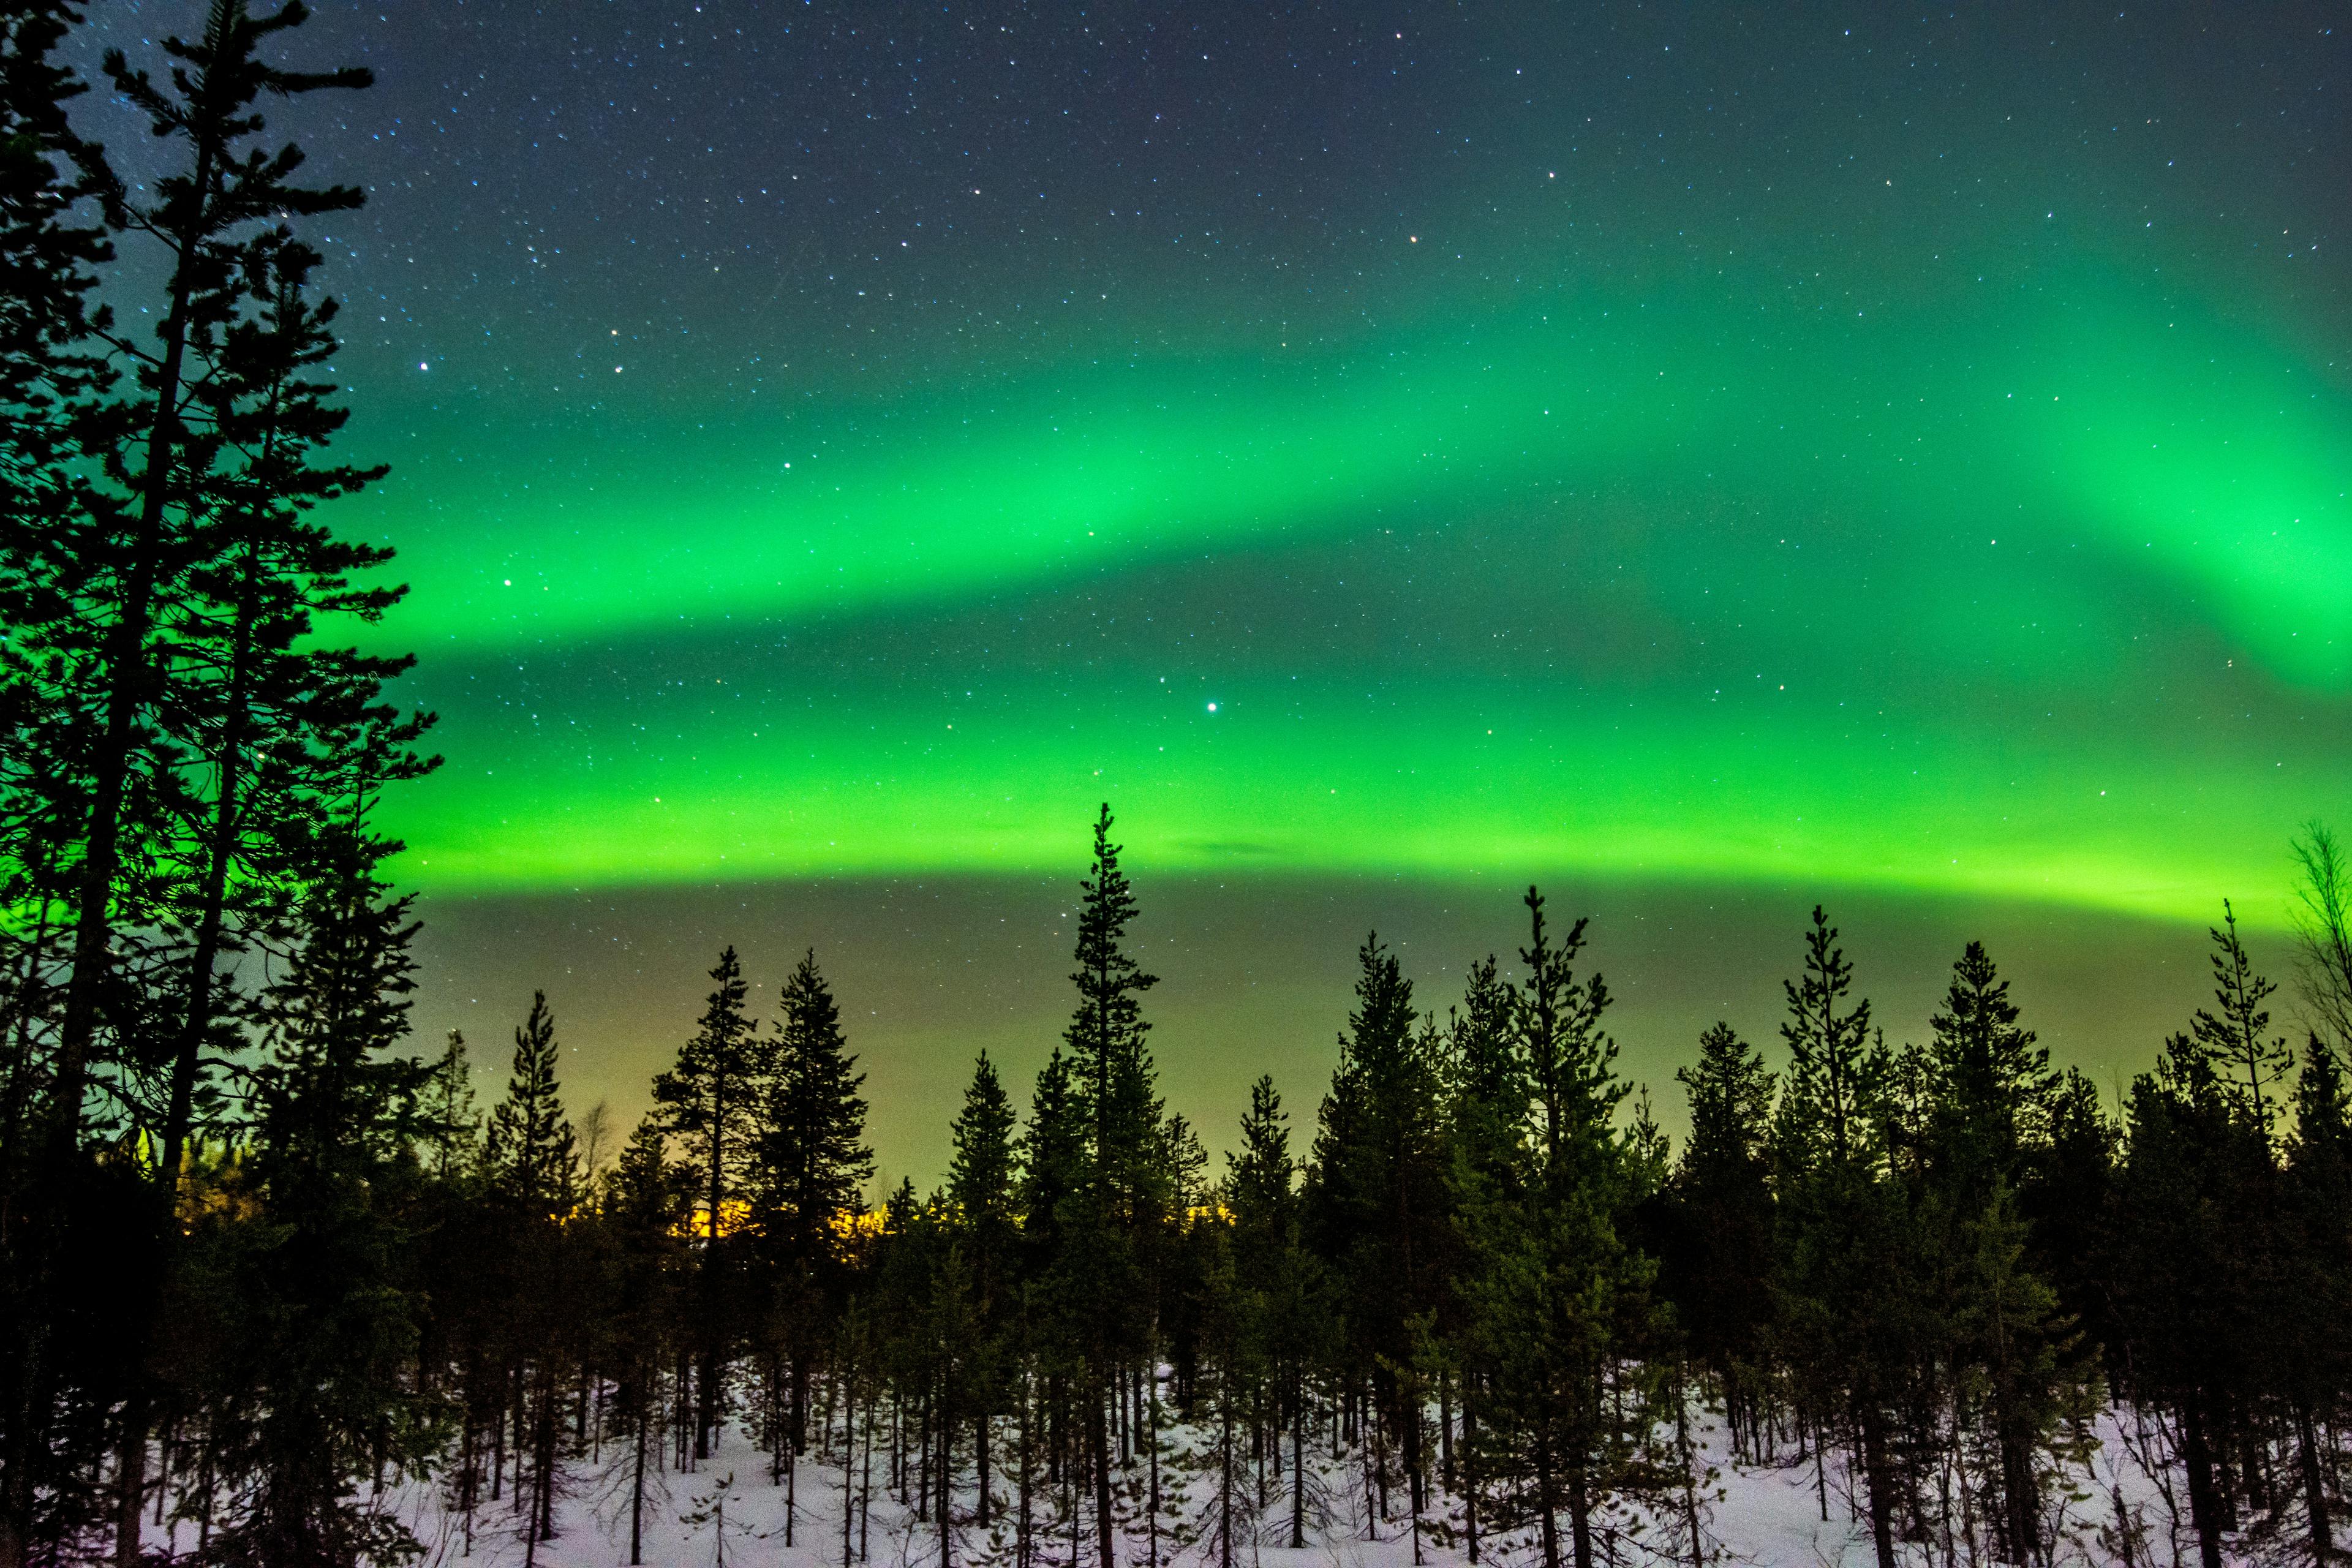 Northern lights in Helsinki – any chance?